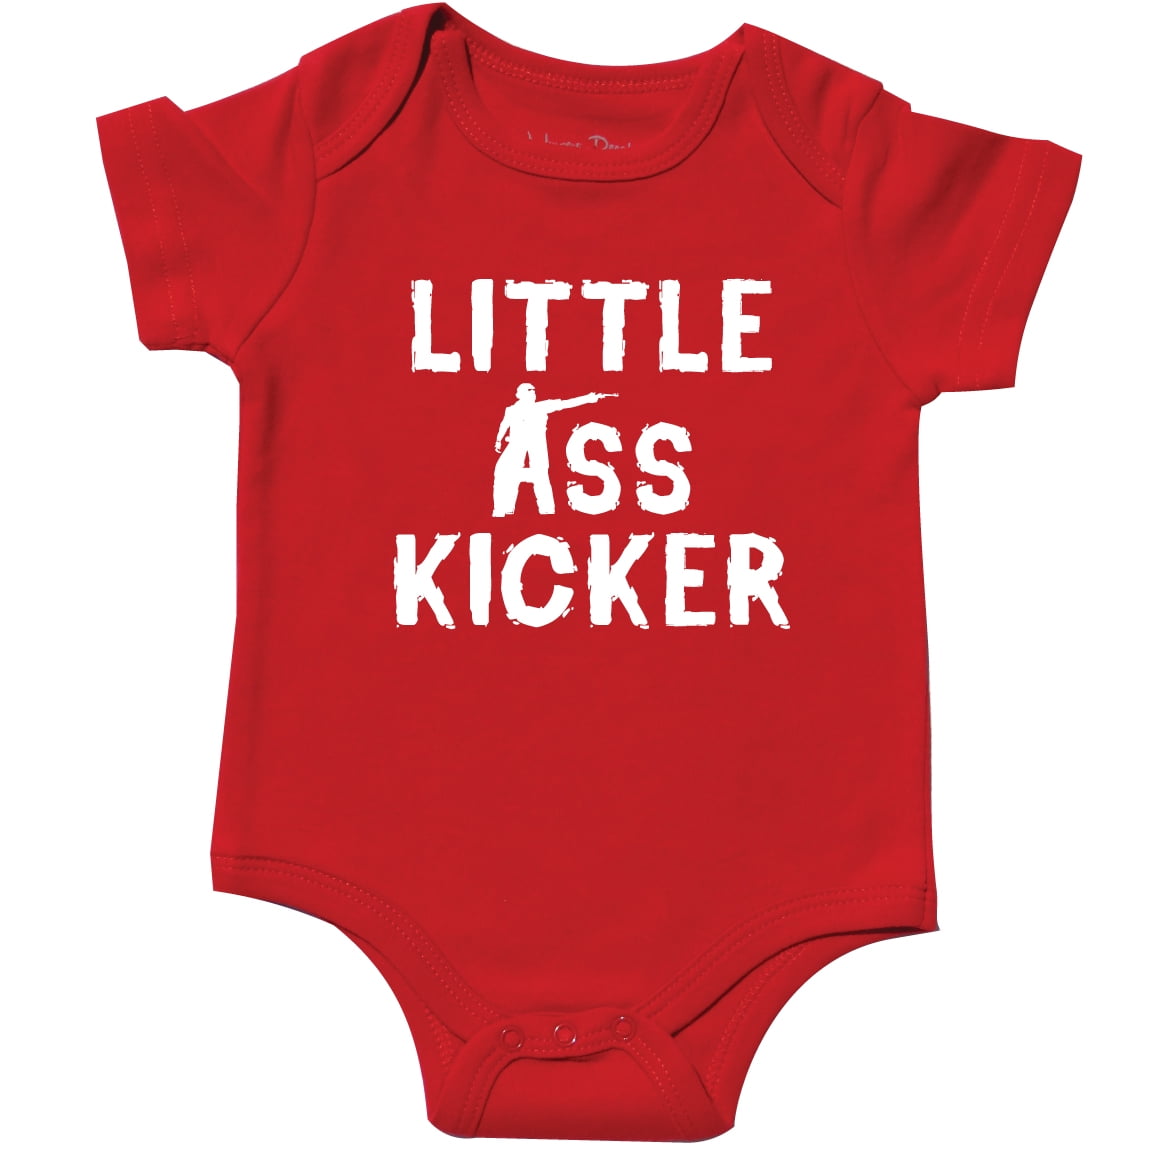 LITTLE ASS KICKER WALKING DEAD BABY VEST/ GROW WHITE AVAILABLE IN MOST SIZE